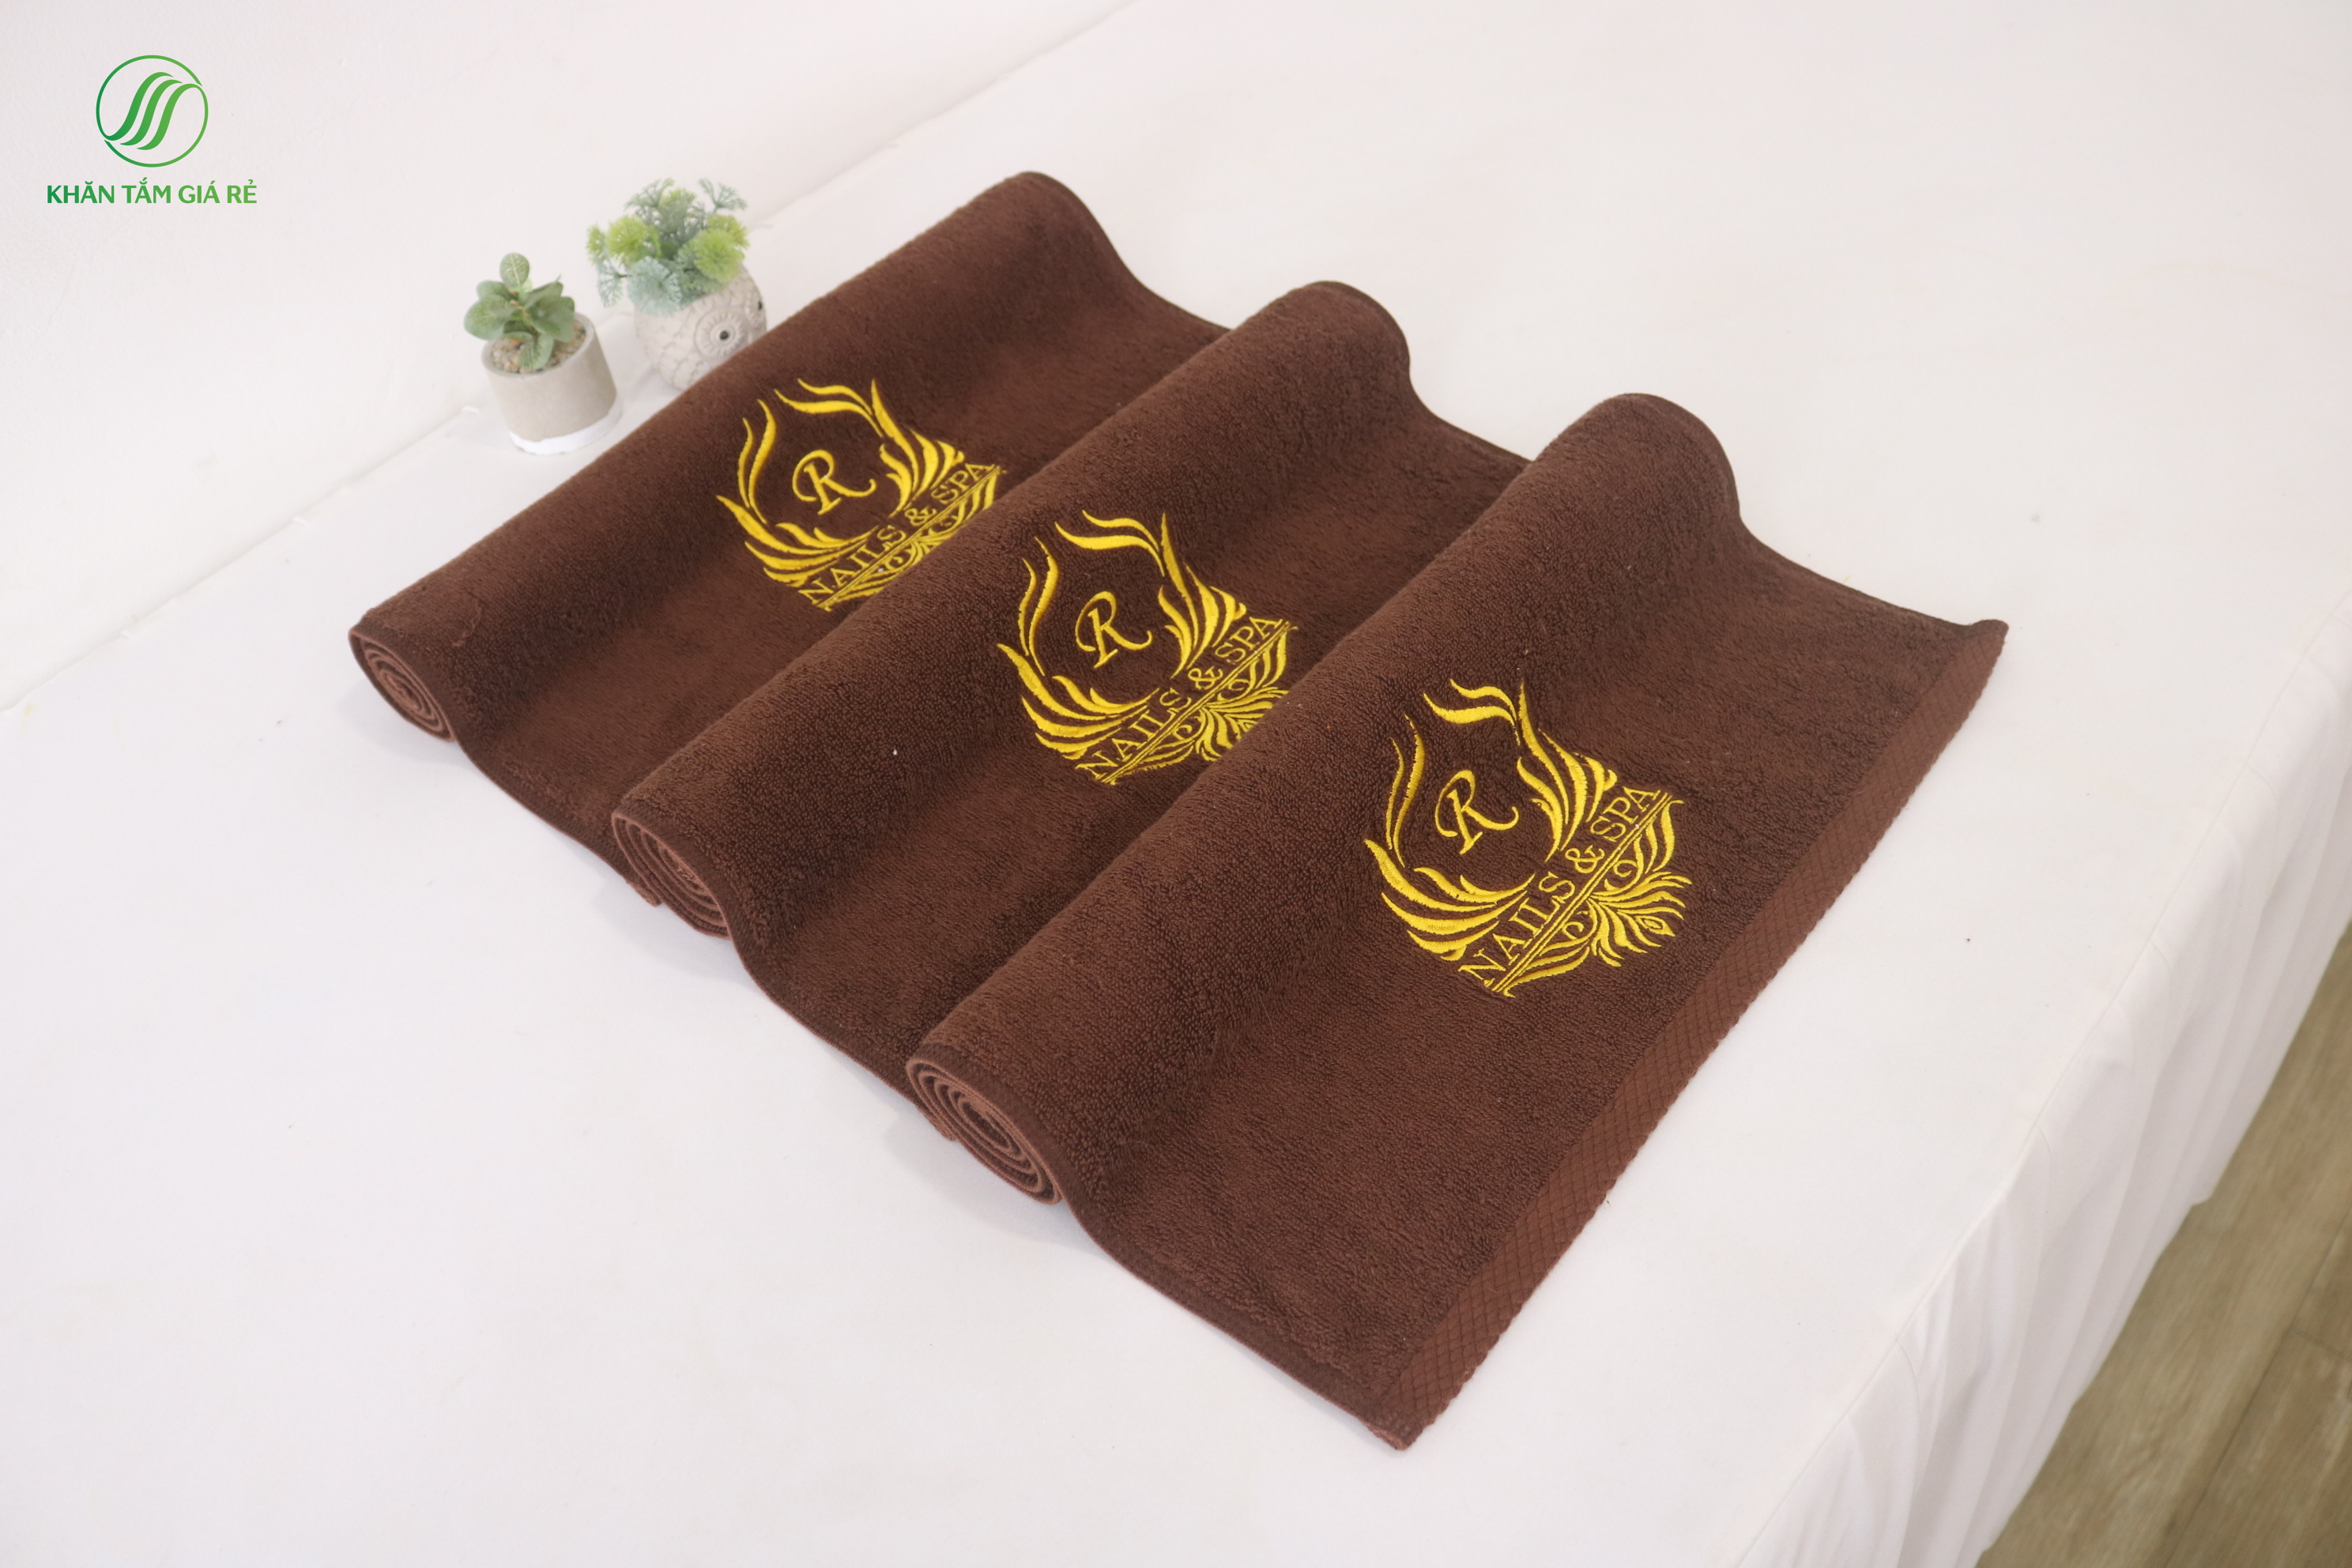 Towels Cheap factory and own technology, quality is always guaranteed